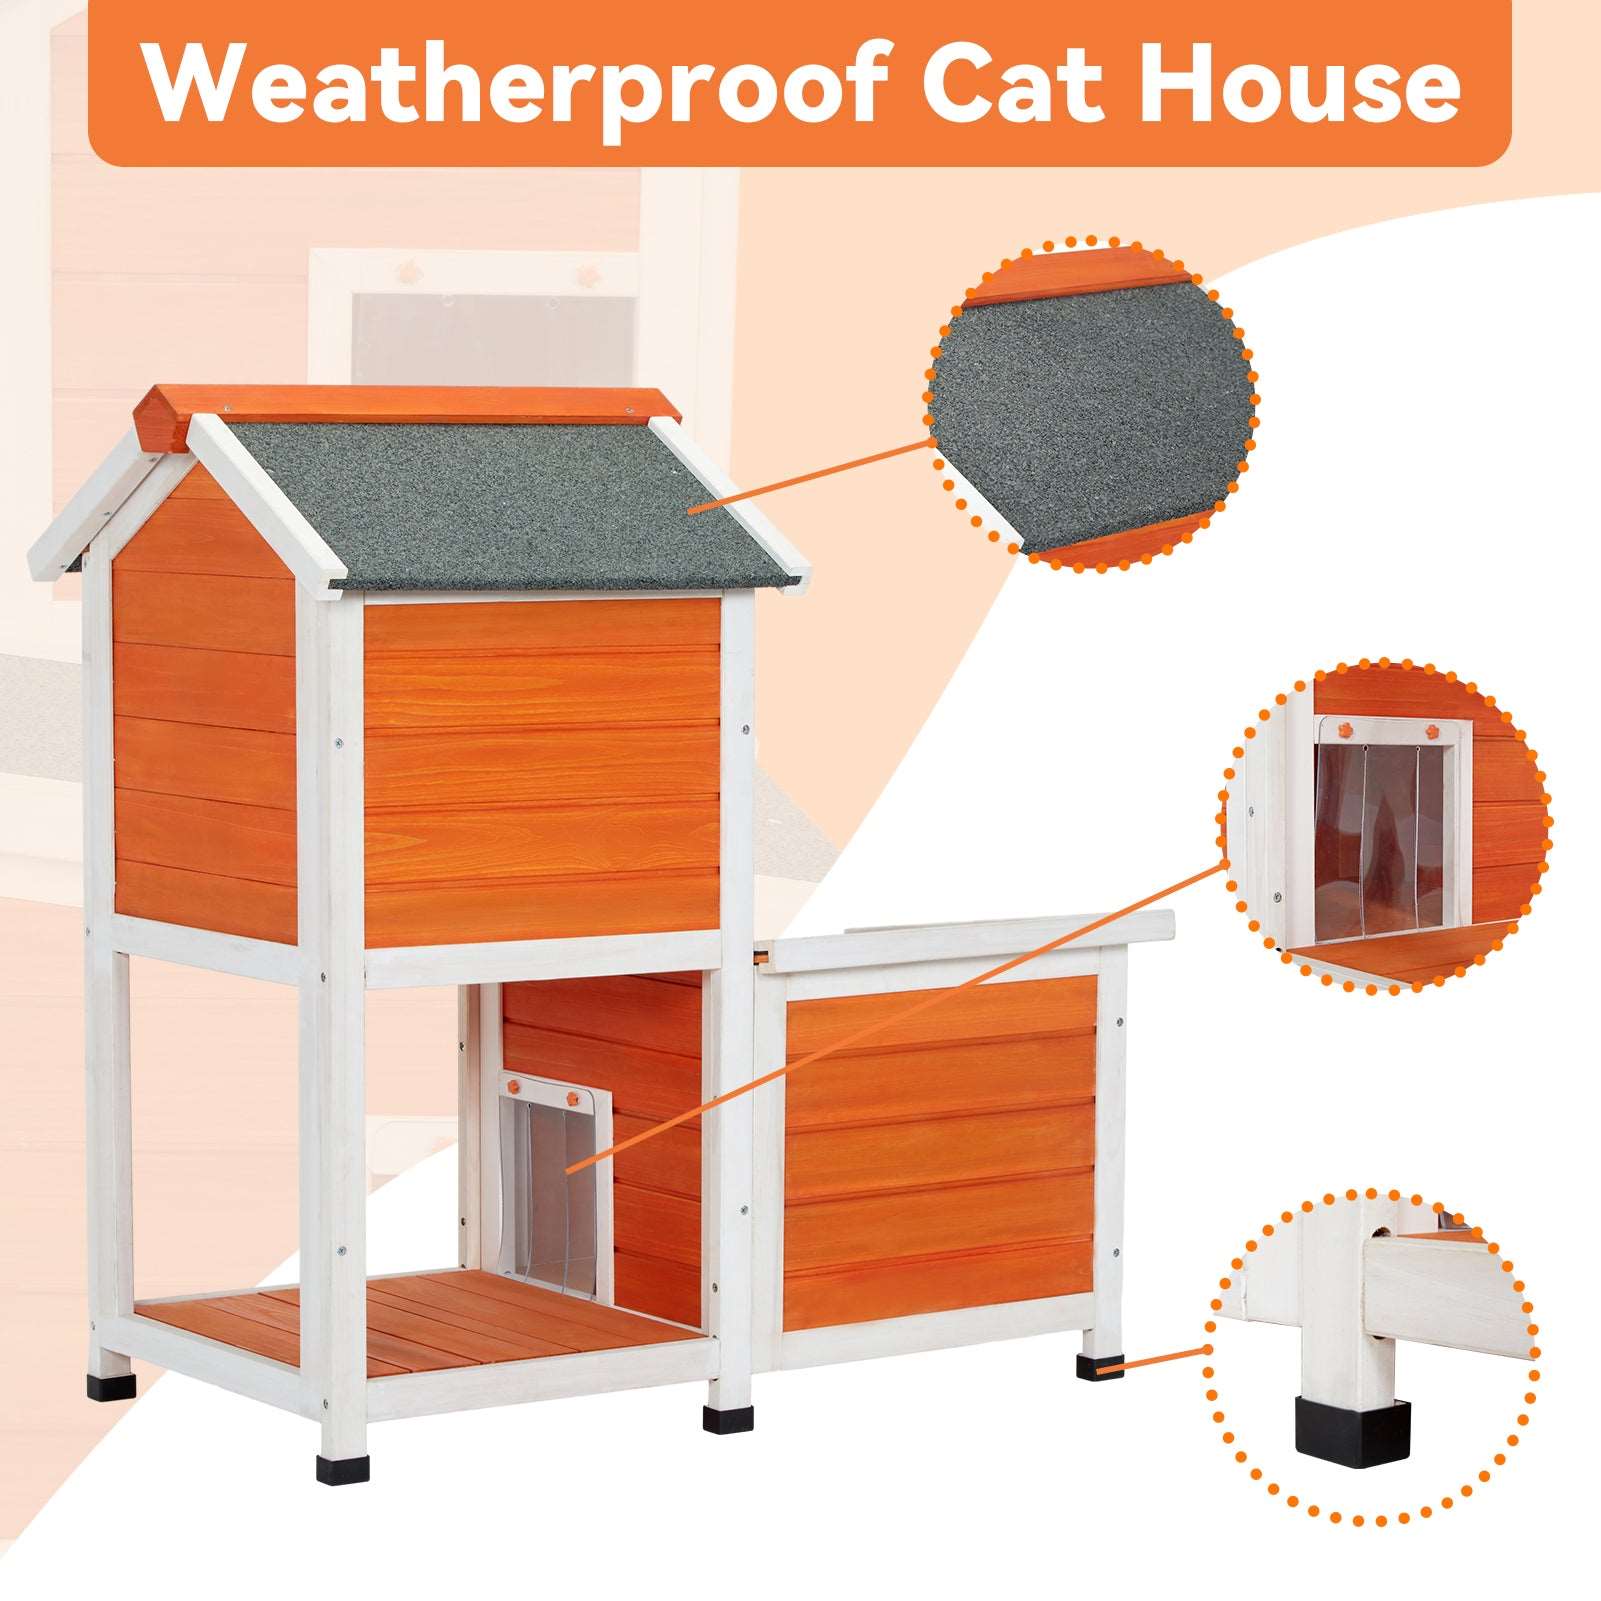 petsfit-2-stroy-cat-house-outdoor-insulated-high-feet-feeding-station-door-curtain-wood-outside-cat-house-bunny-rabbit-hutch-orange-07